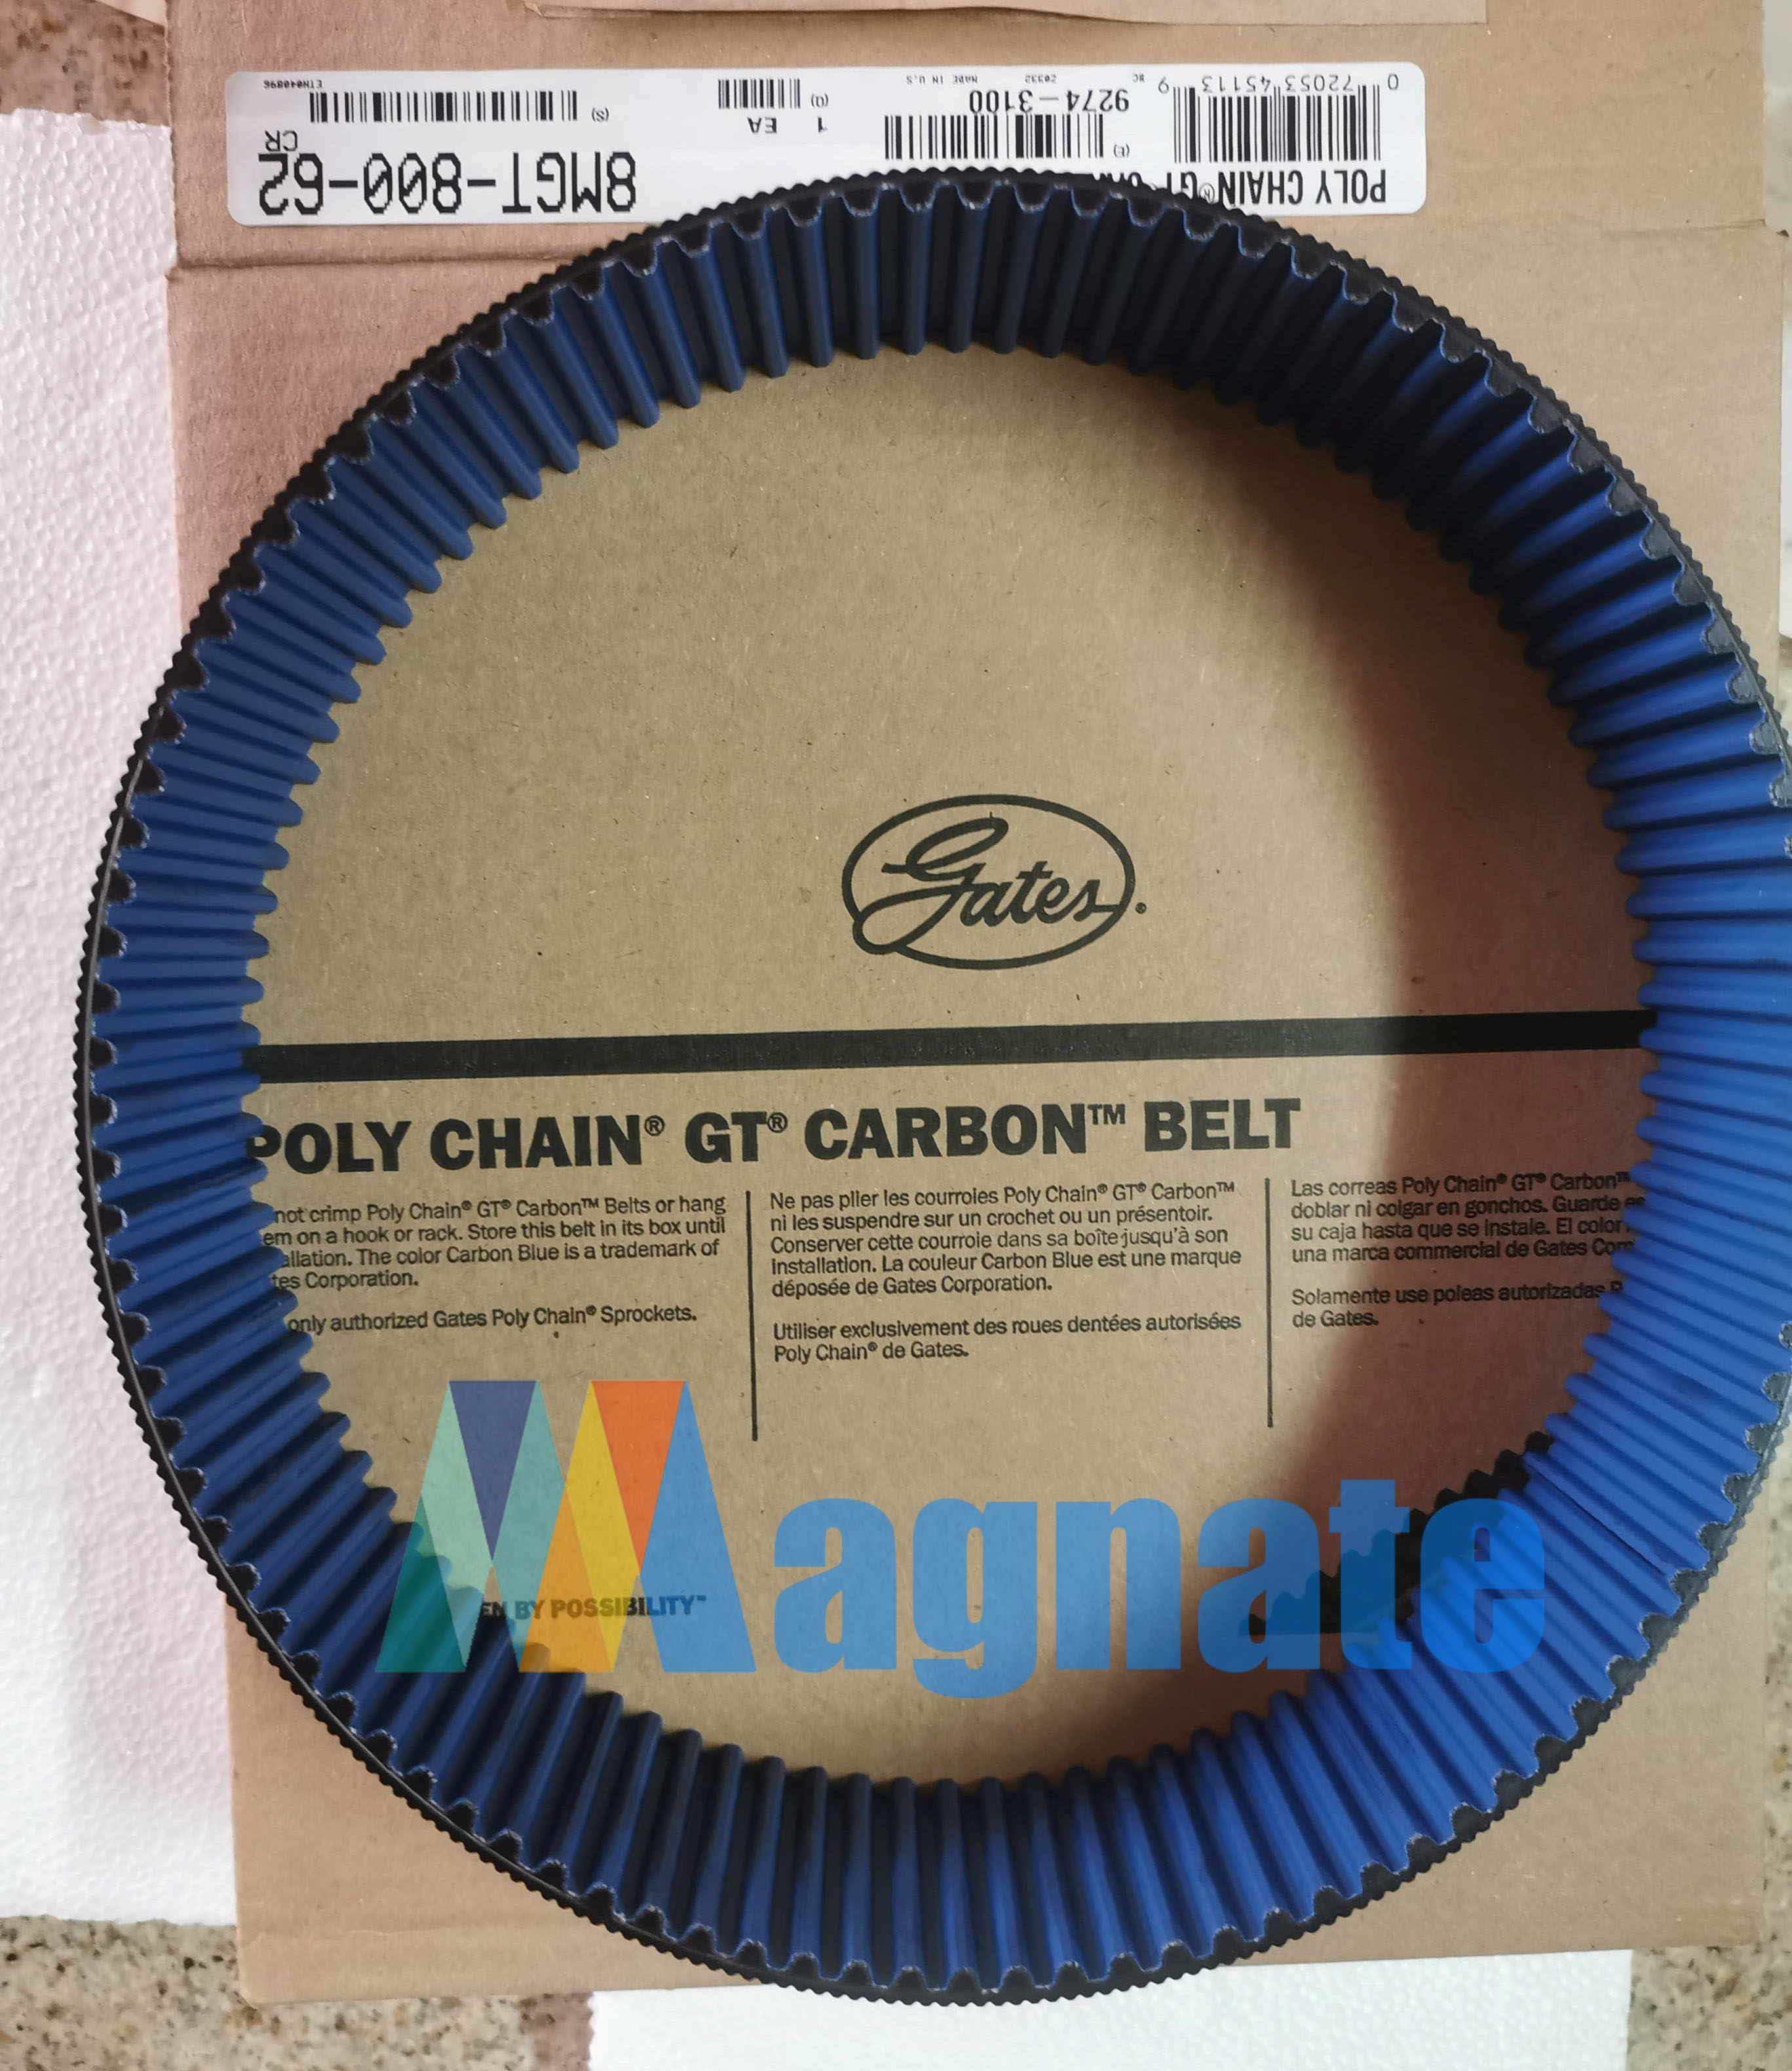 Brand: Gates Poly Chain GT Carbon Belt 8MGT-800-62